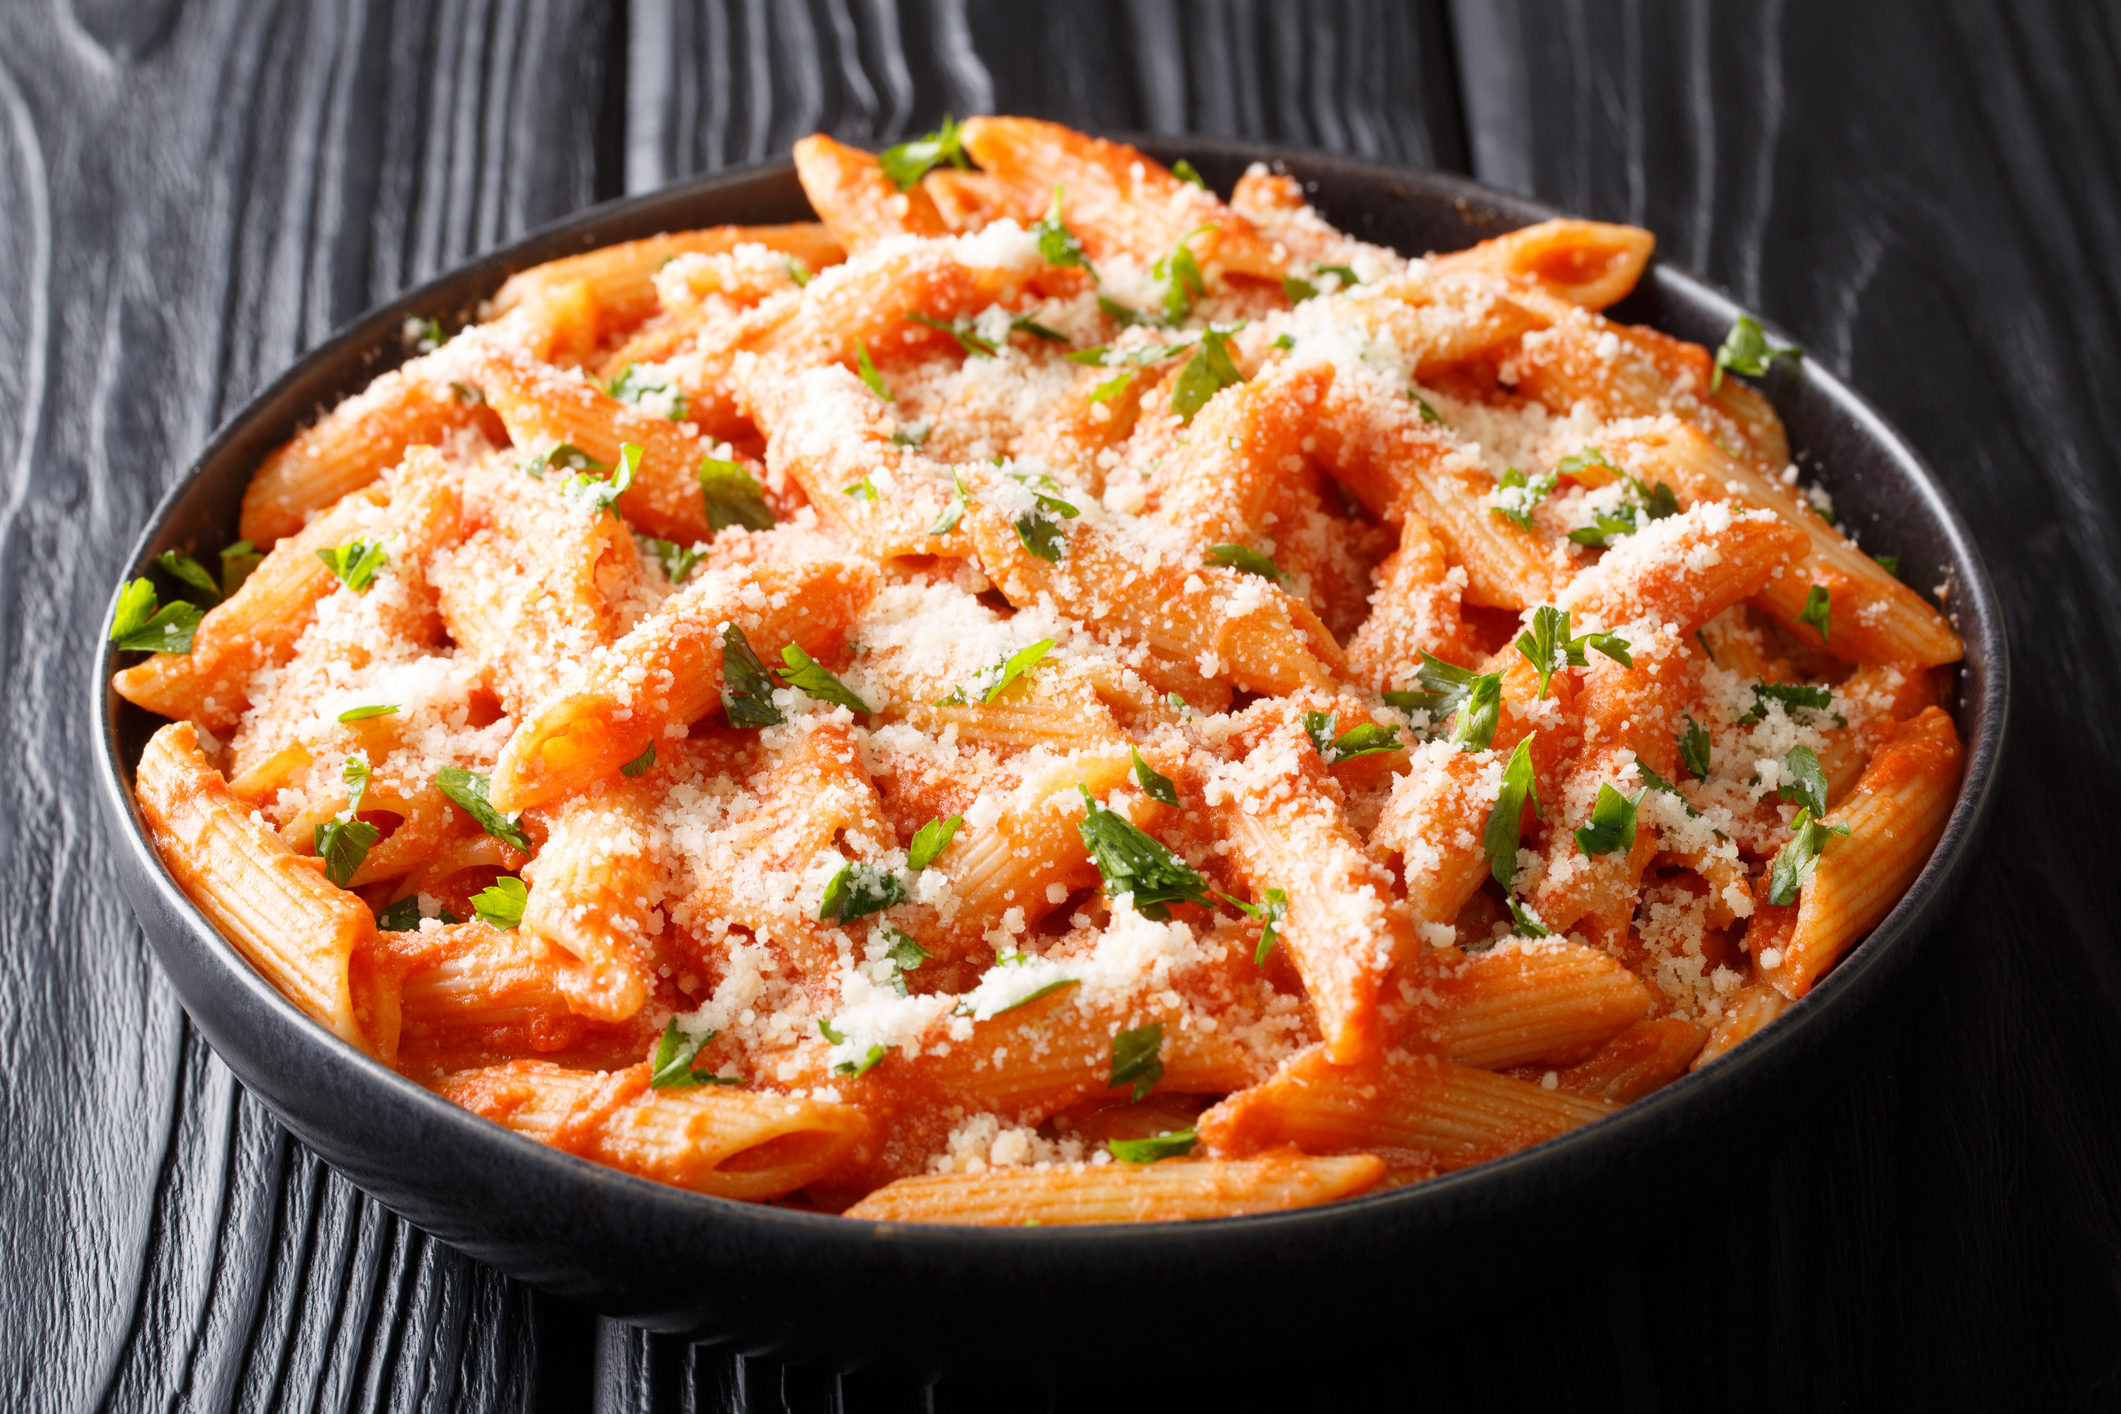 Penne alla Vodka is a classic Italian pasta dish made with penne in a creamy tomato and vodka sauce close-up in a plate